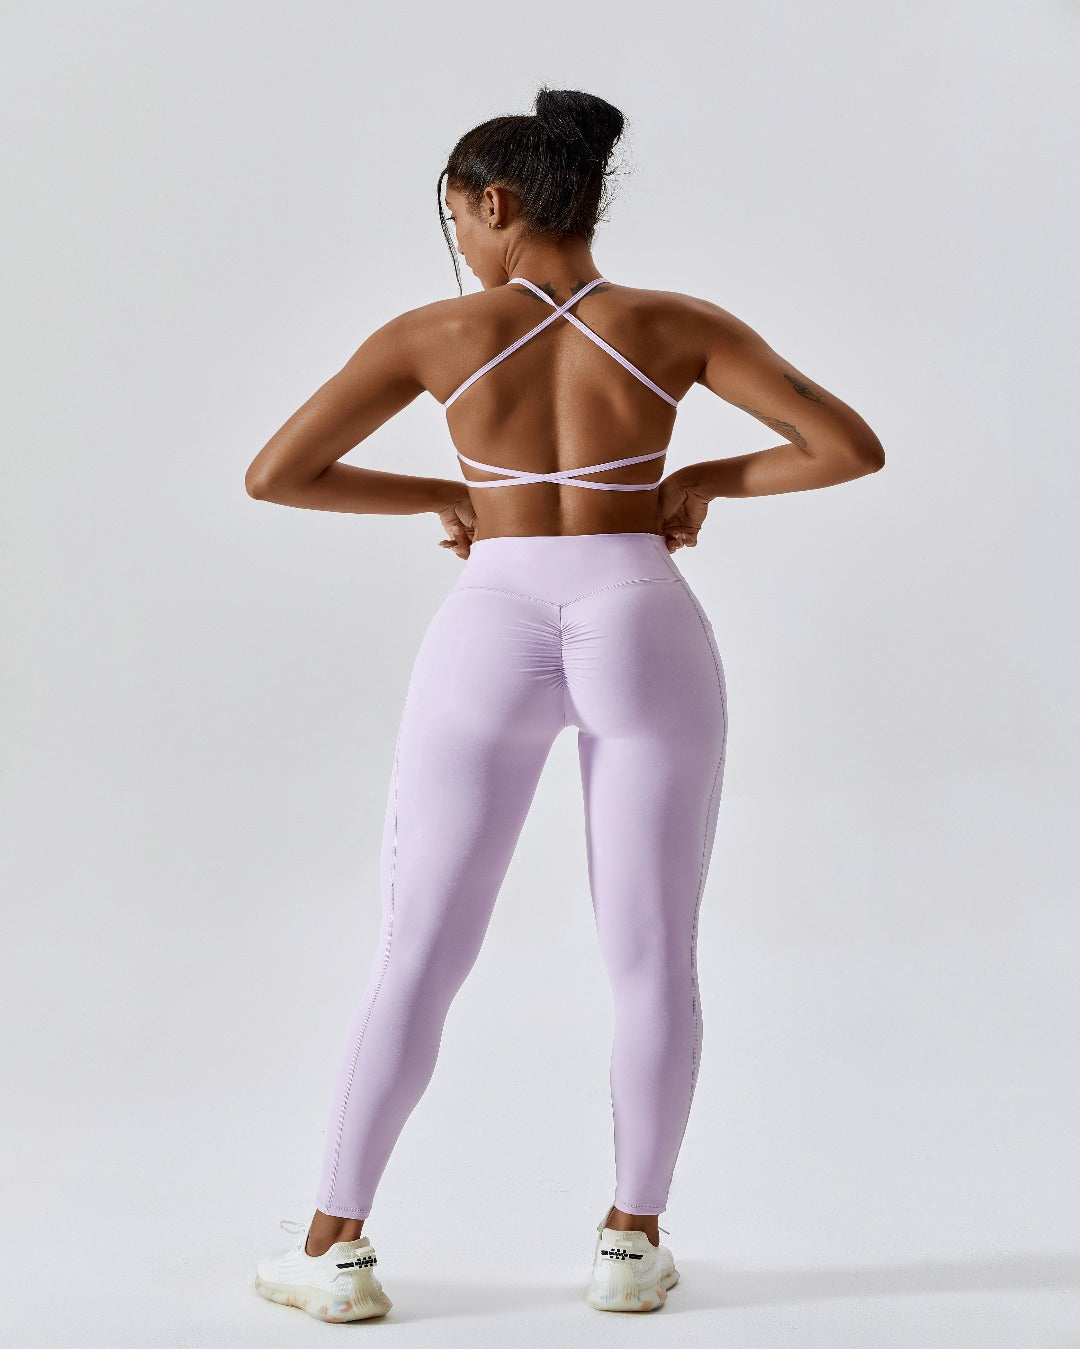 Crossover leggings with pockets – CRM Jewelers